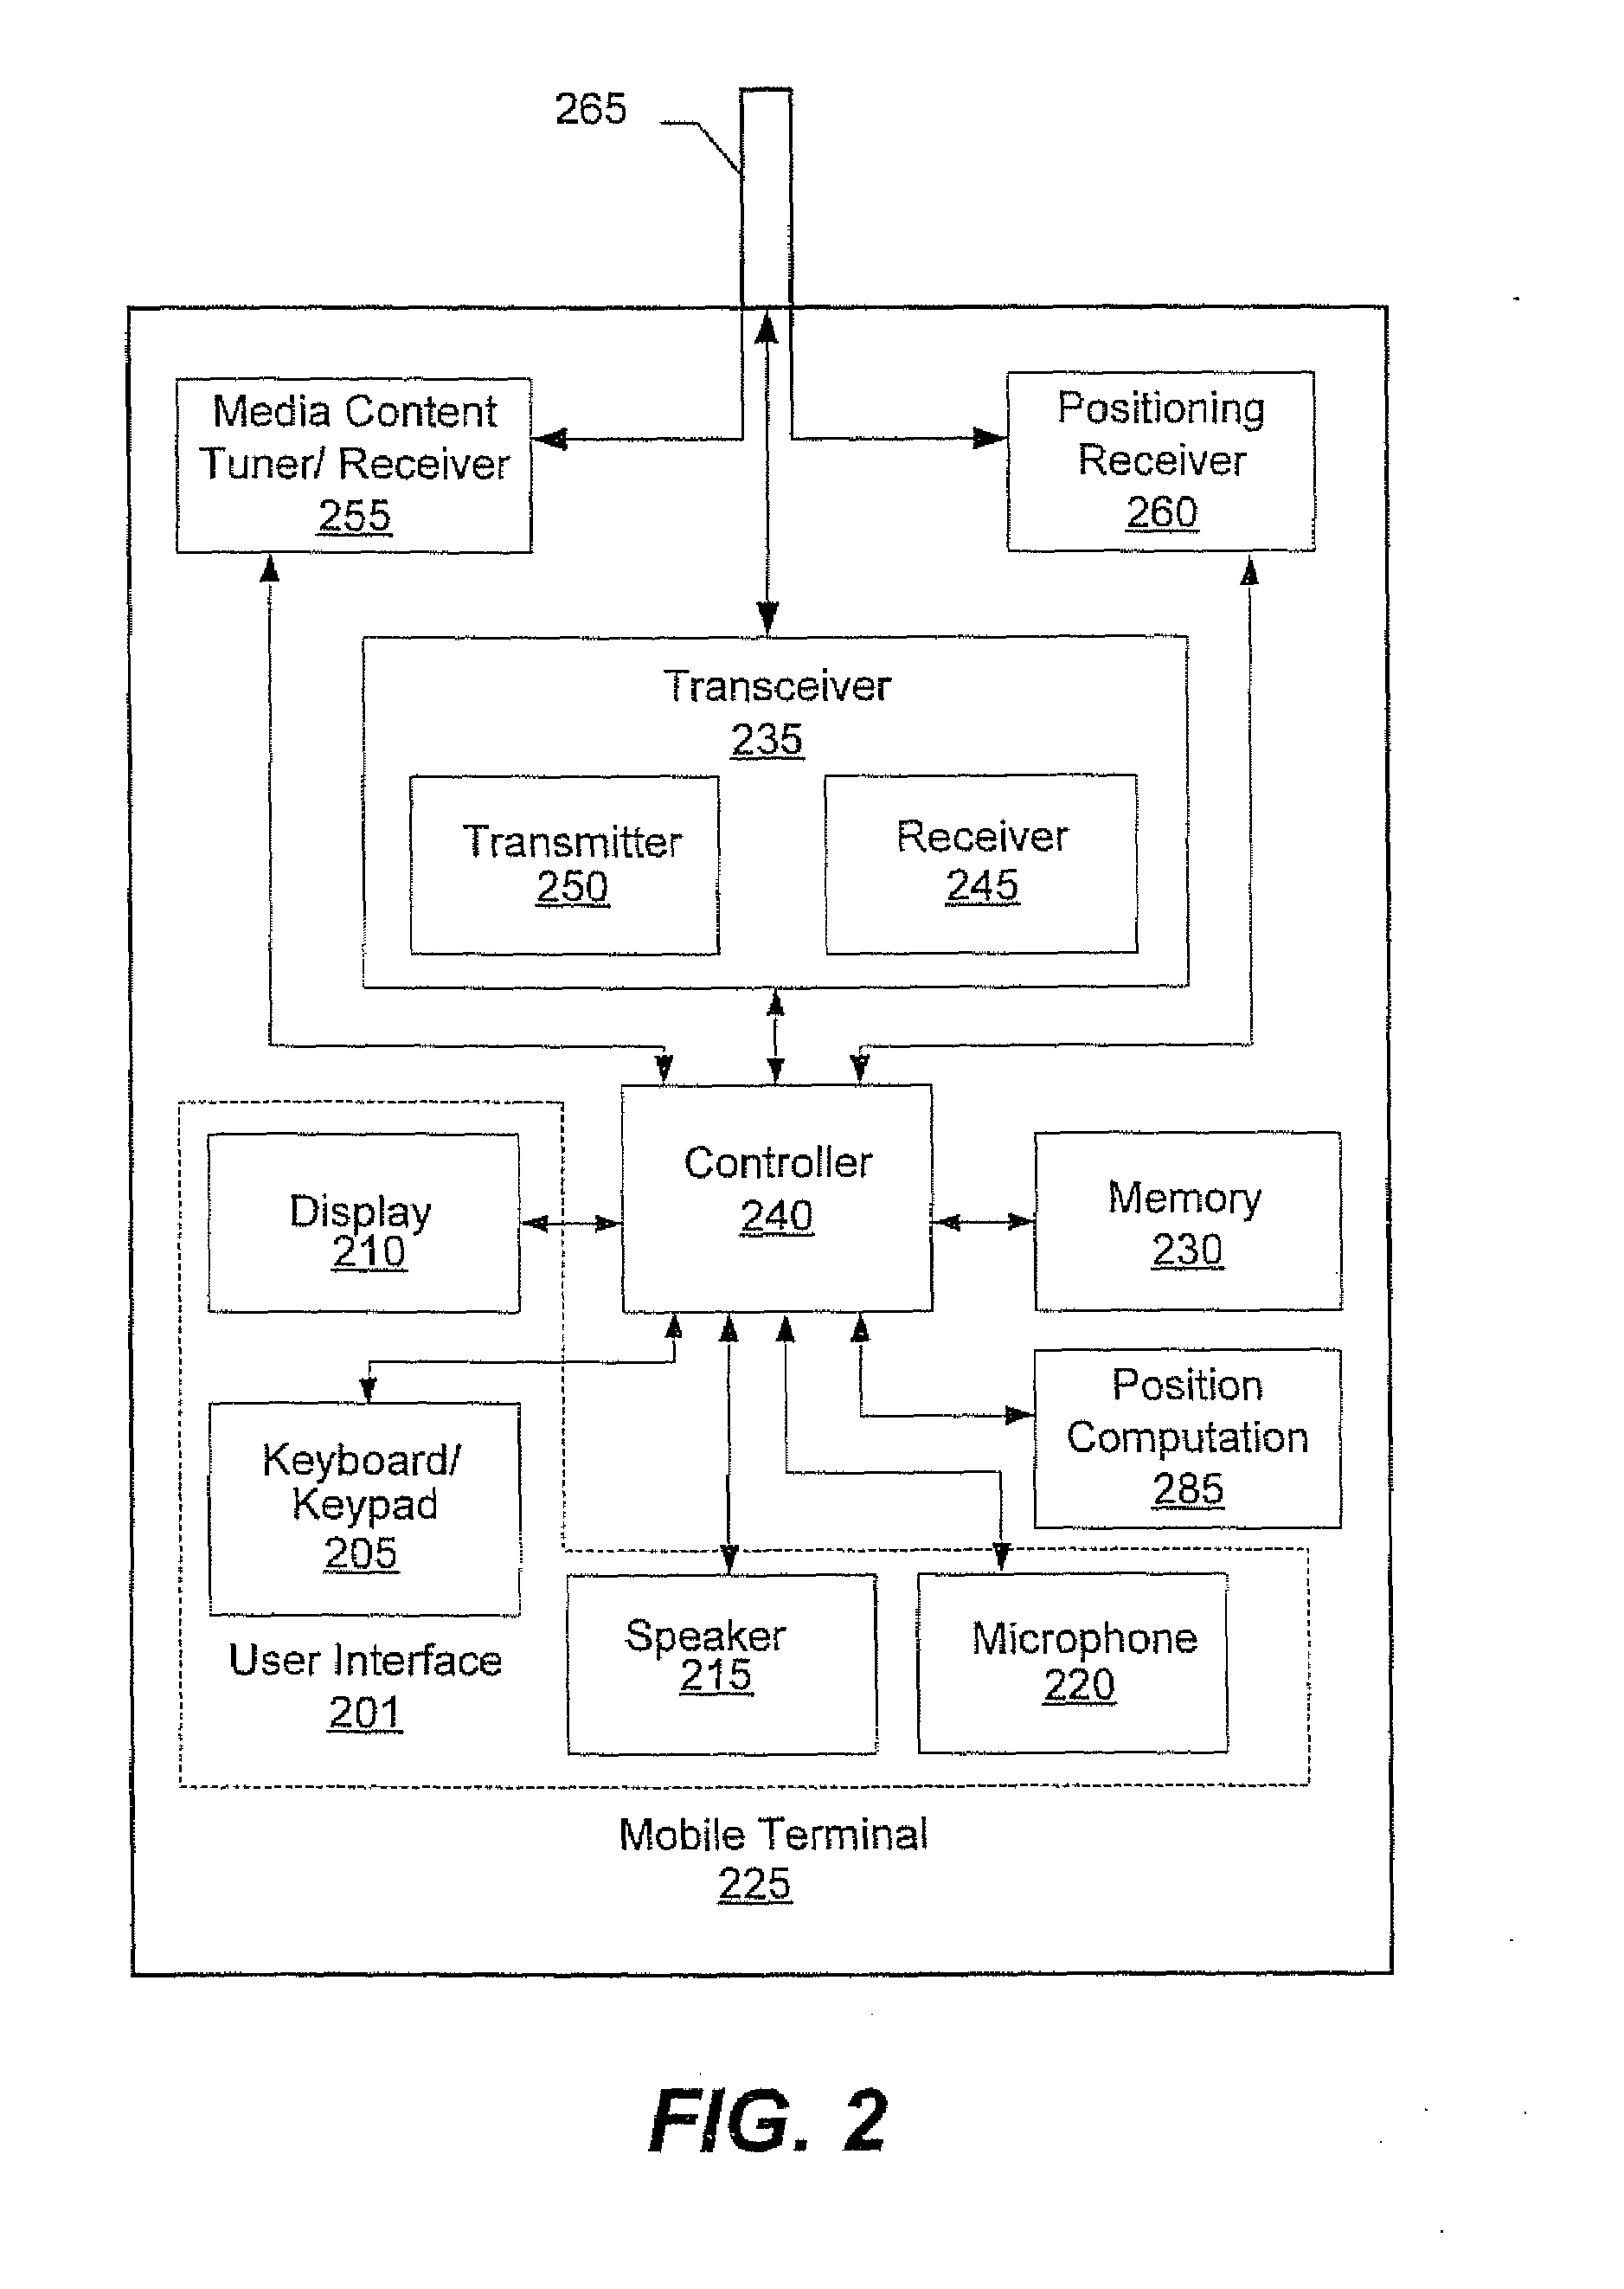 Methods, systems, and devices for identifying and providing access to broadcast media content using a mobile terminal